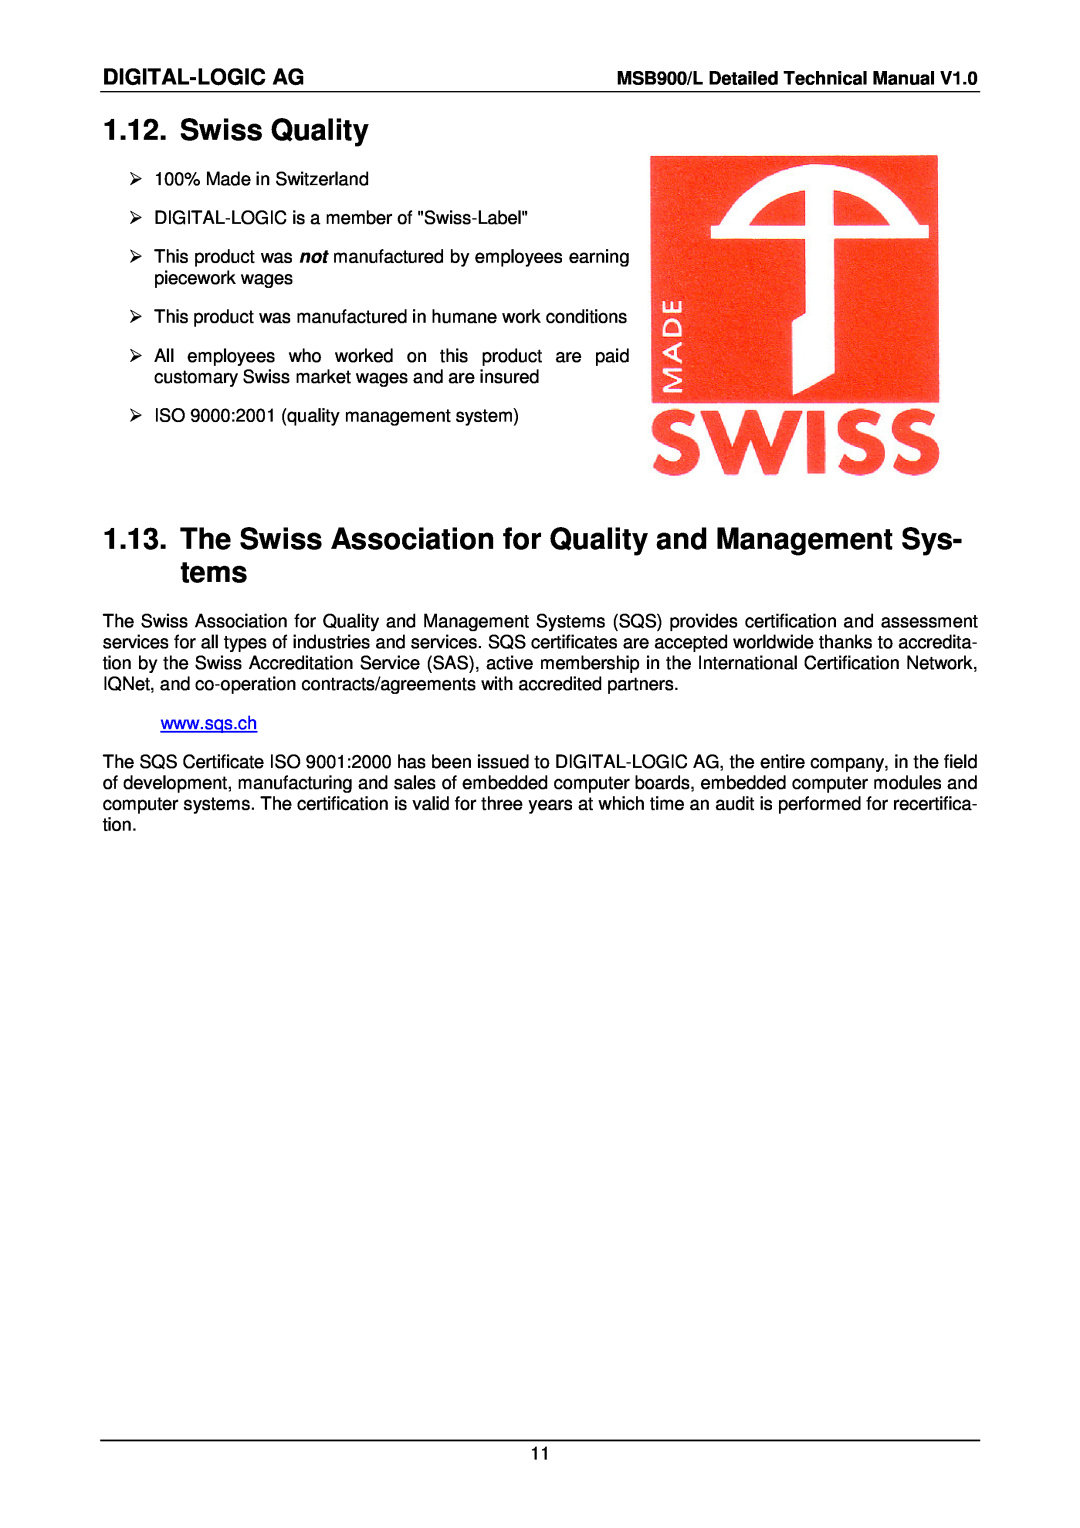 Compaq MSB900L user manual Swiss Quality, The Swiss Association for Quality and Management Sys- tems, Digital-Logic Ag 